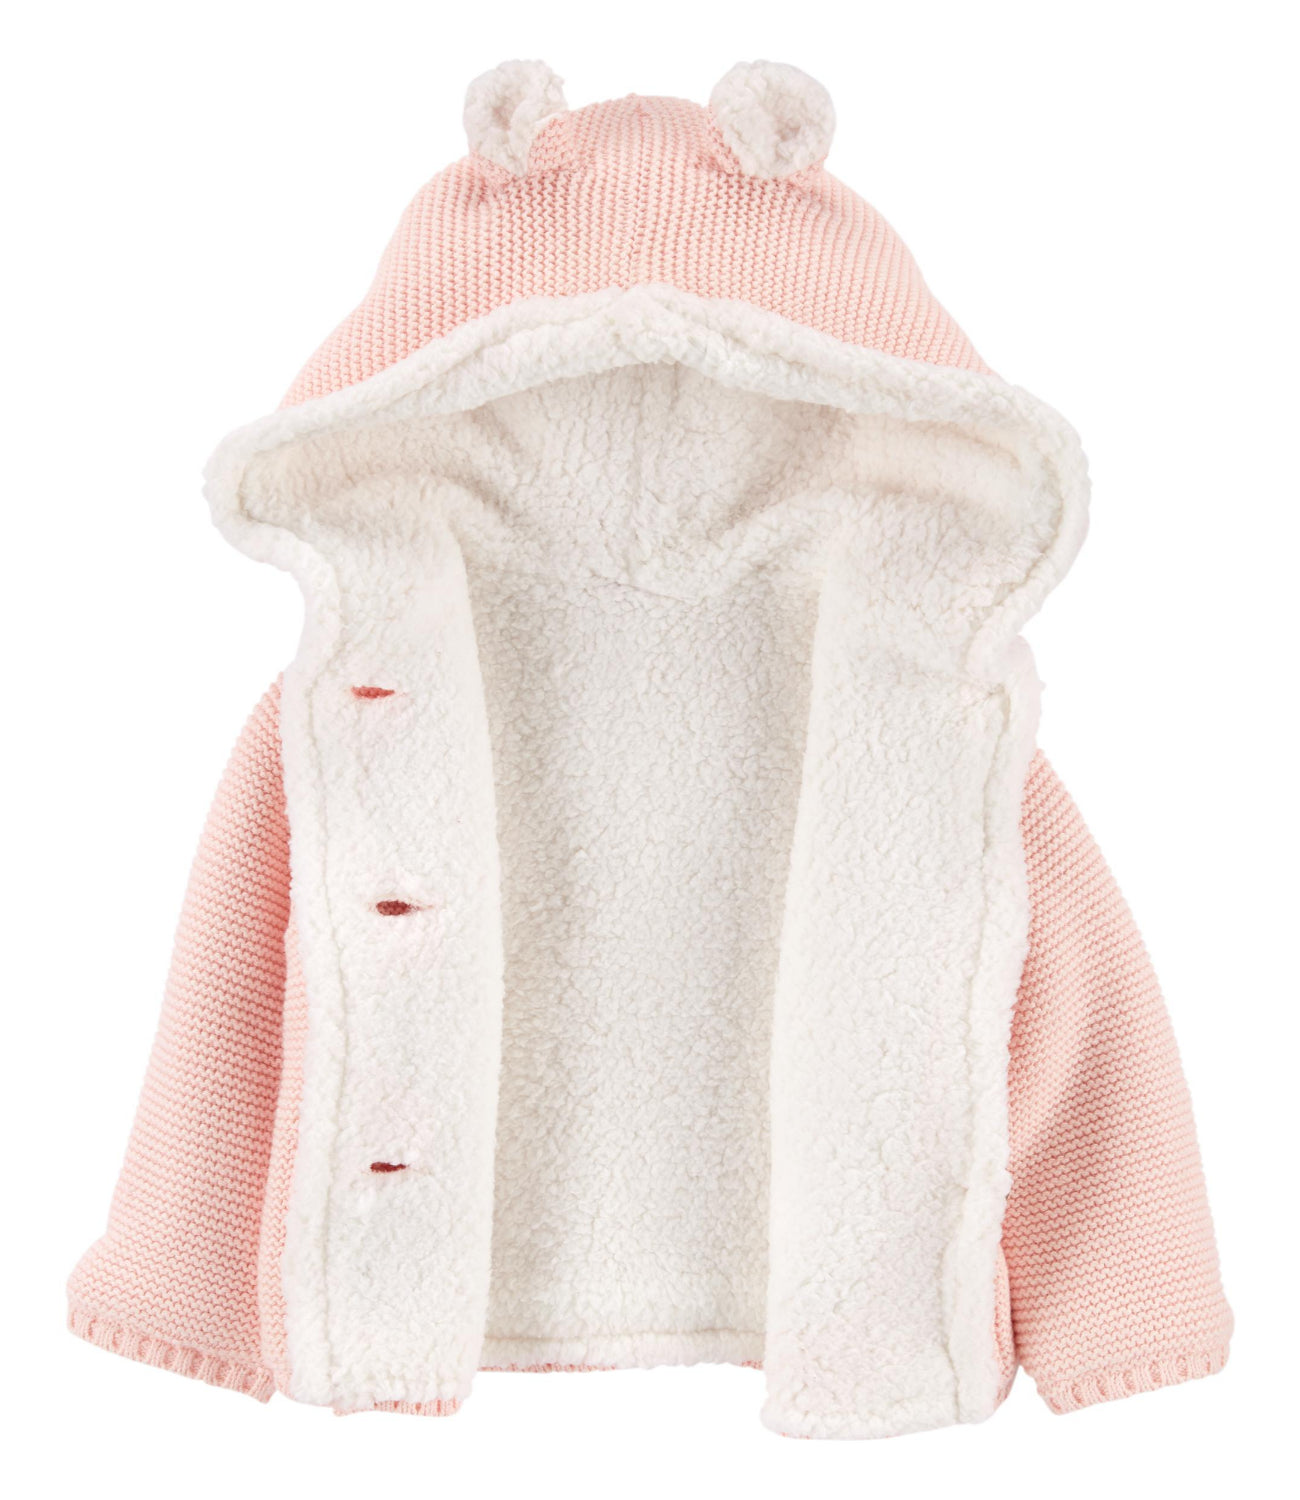 Carters Girls 0-24 Months Sherpa-Lined Cardigan Jacket